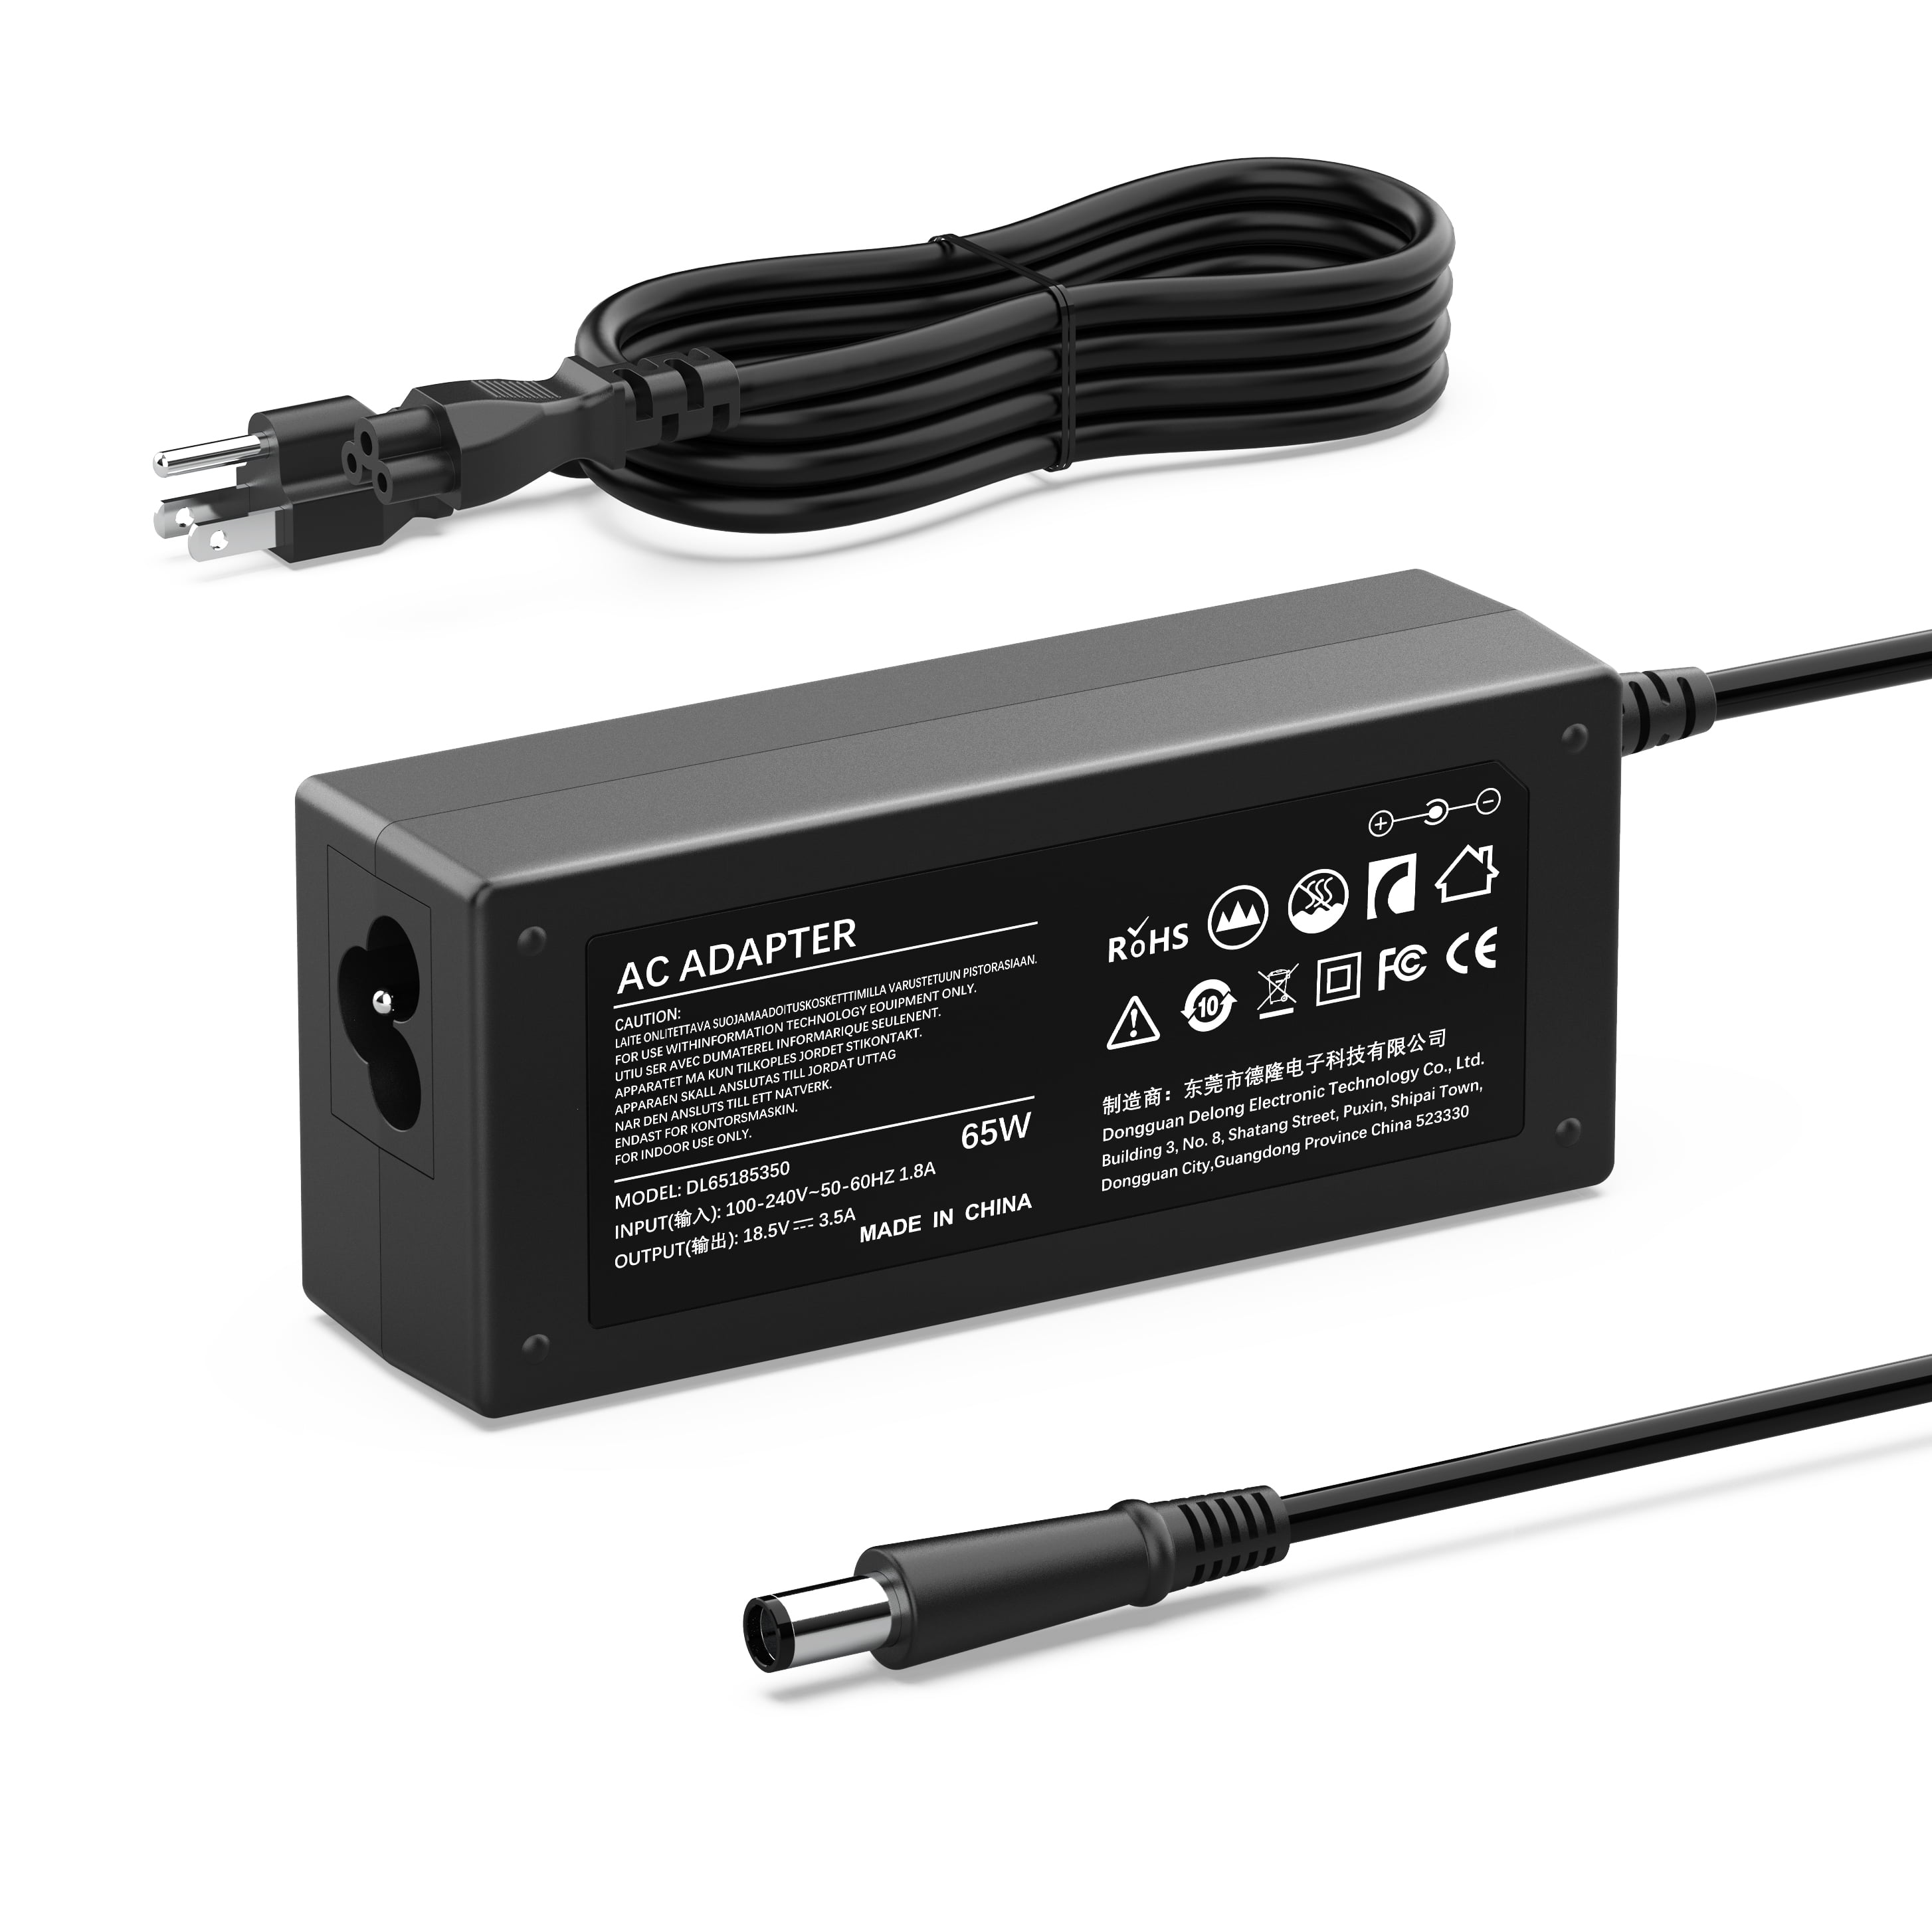 AC Adapter Charger for HP EliteBook 1040 G3, 1040 G4. By Galaxy Bang USA® 